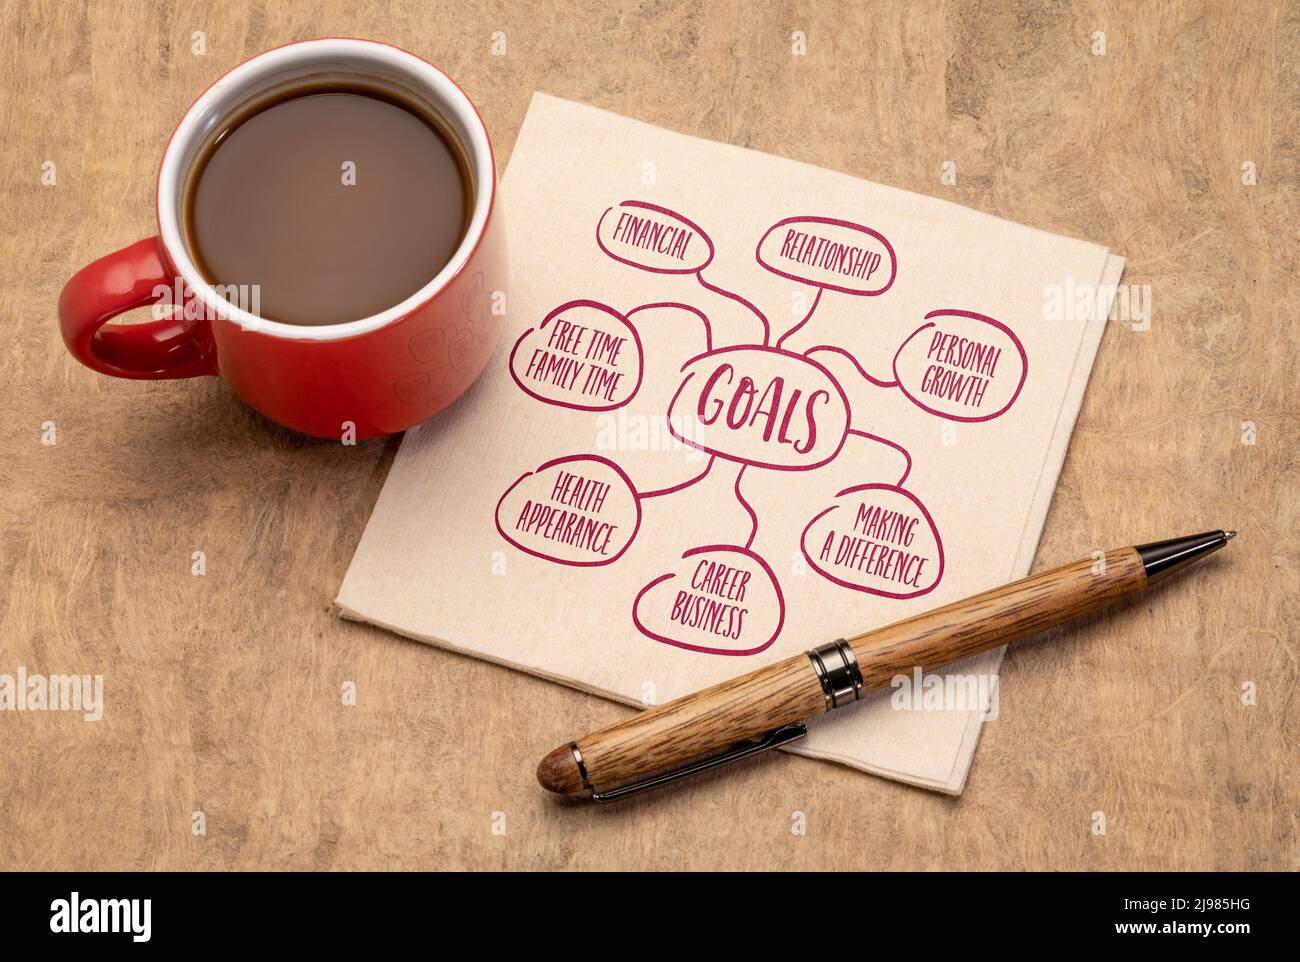 setting goals in different life areas, mind map sketch on a napkin with a cup of coffee, business and personal development Stock Photo